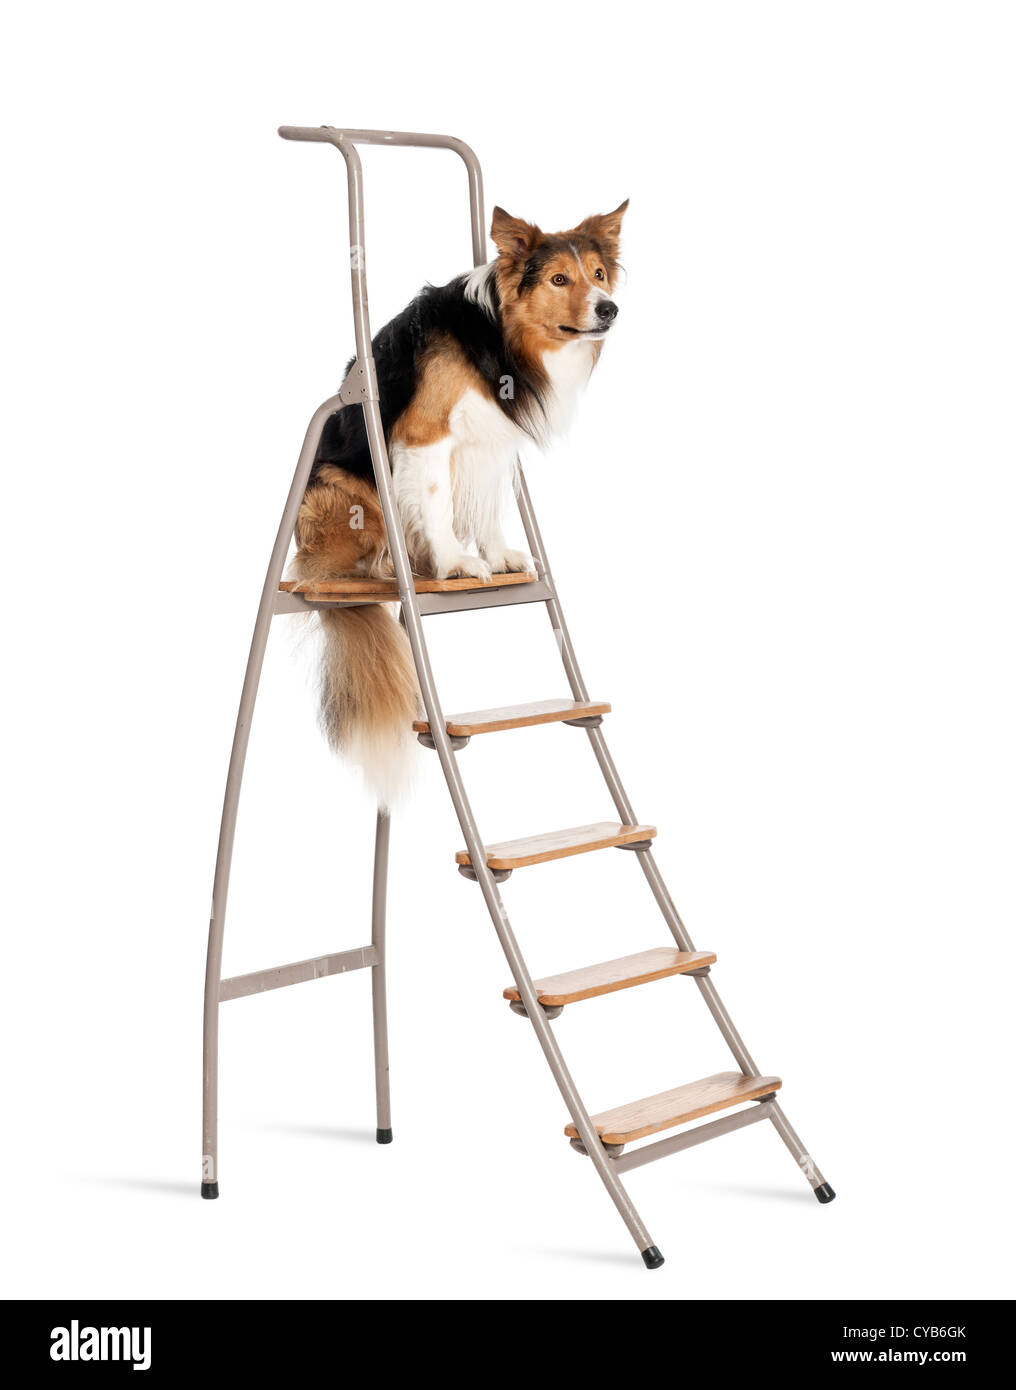 Border Collie sitting on a ladder against white background Stock Photo